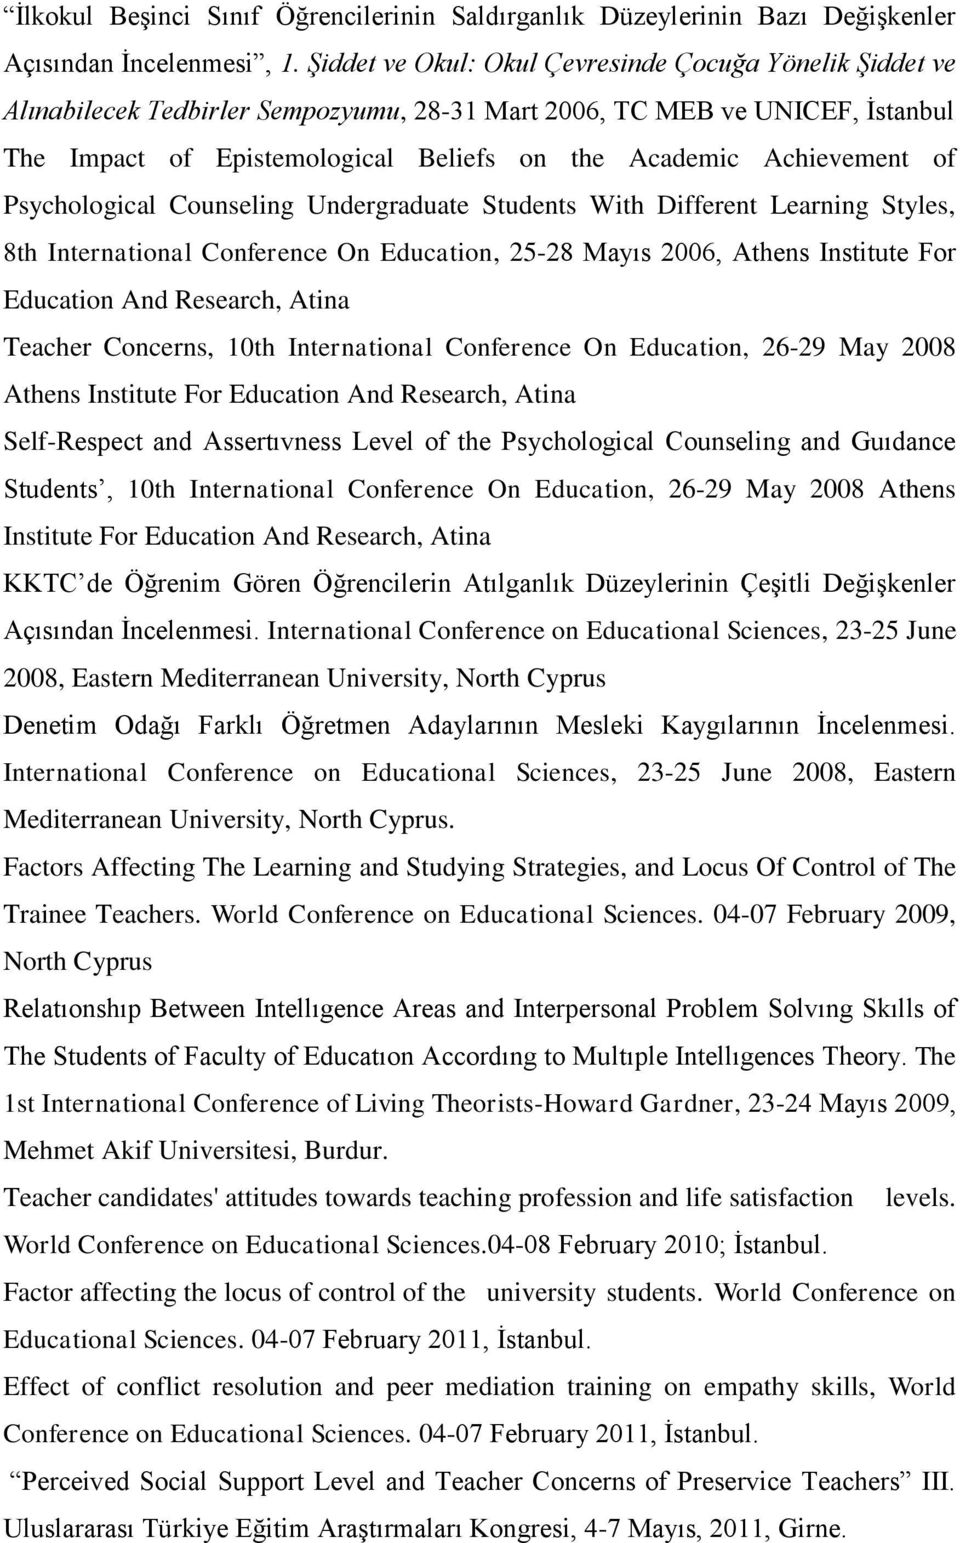 Achievement of Psychological Counseling Undergraduate Students With Different Learning Styles, 8th International Conference On Education, 25-28 Mayıs 2006, Athens Institute For Education And